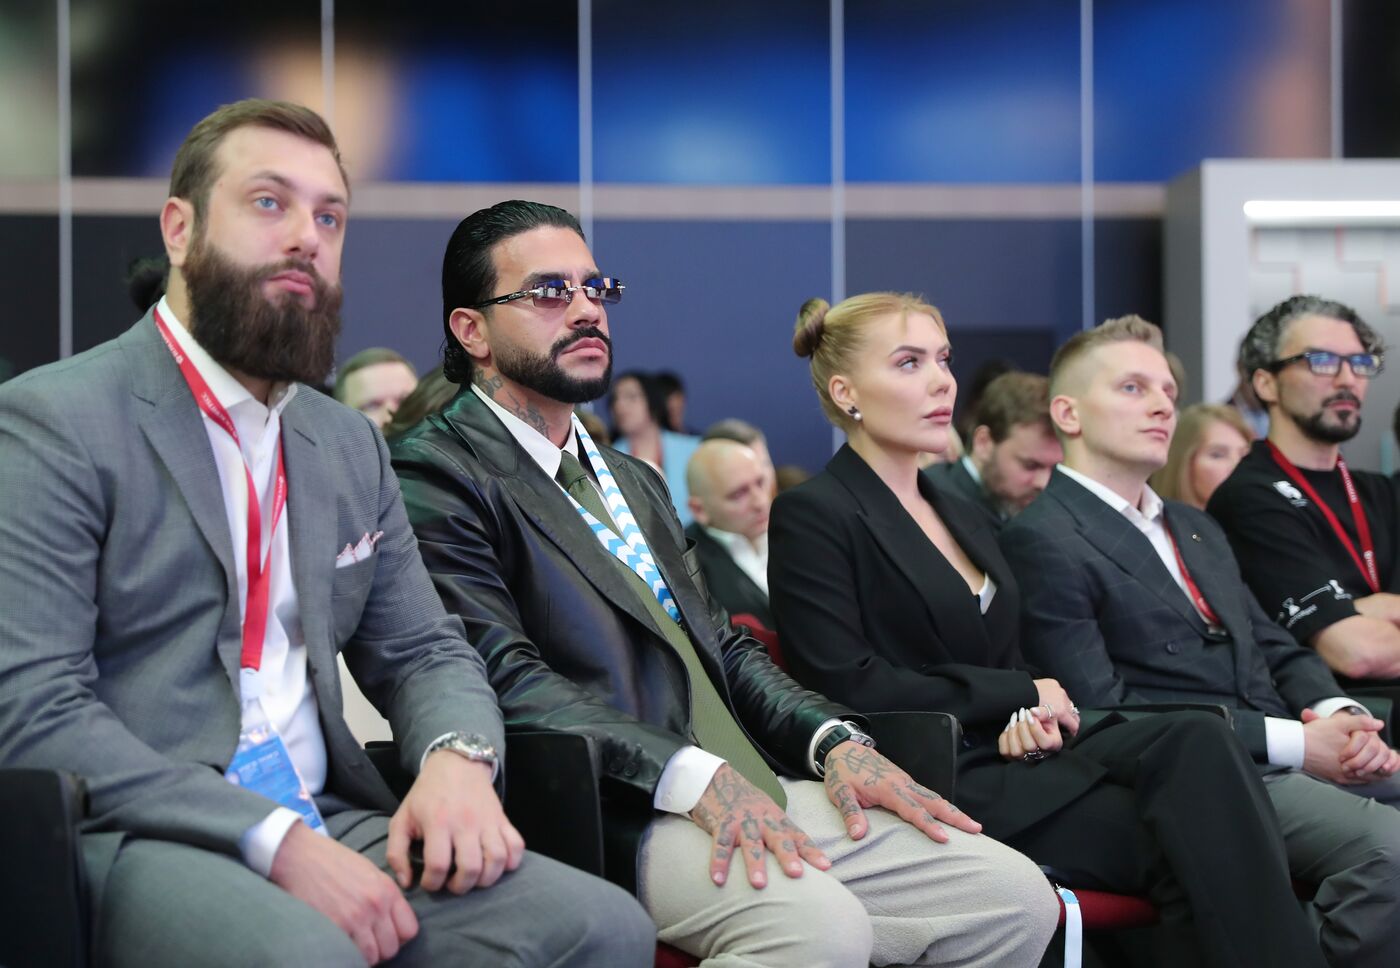 SPIEF-2023. The Investment Potential of Russia’s Creative Industries